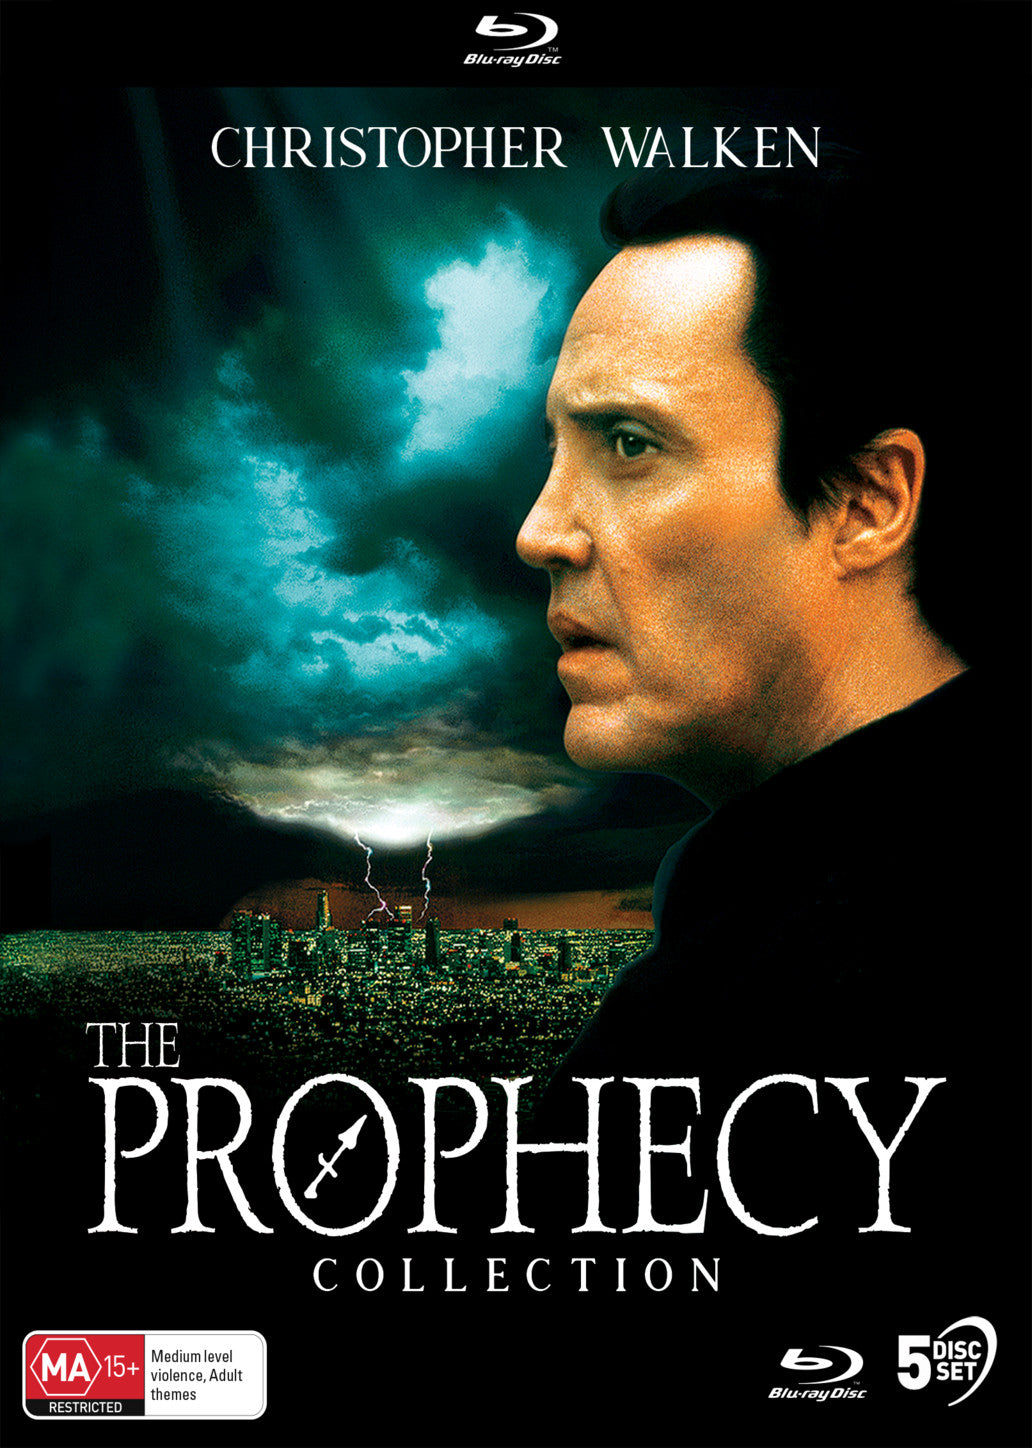 THE PROPHECY COLLECTION - LIMITED EDITION (LENTICULAR COVER / HARD SLIPCASE) BLU-RAY (THE PROPHECY, THE PROPHECY II, THE PROPHECY III: THE ASCENT, THE PROPHECY IV: THE UPRISING, THE PROPHECY V: FORSAKEN)